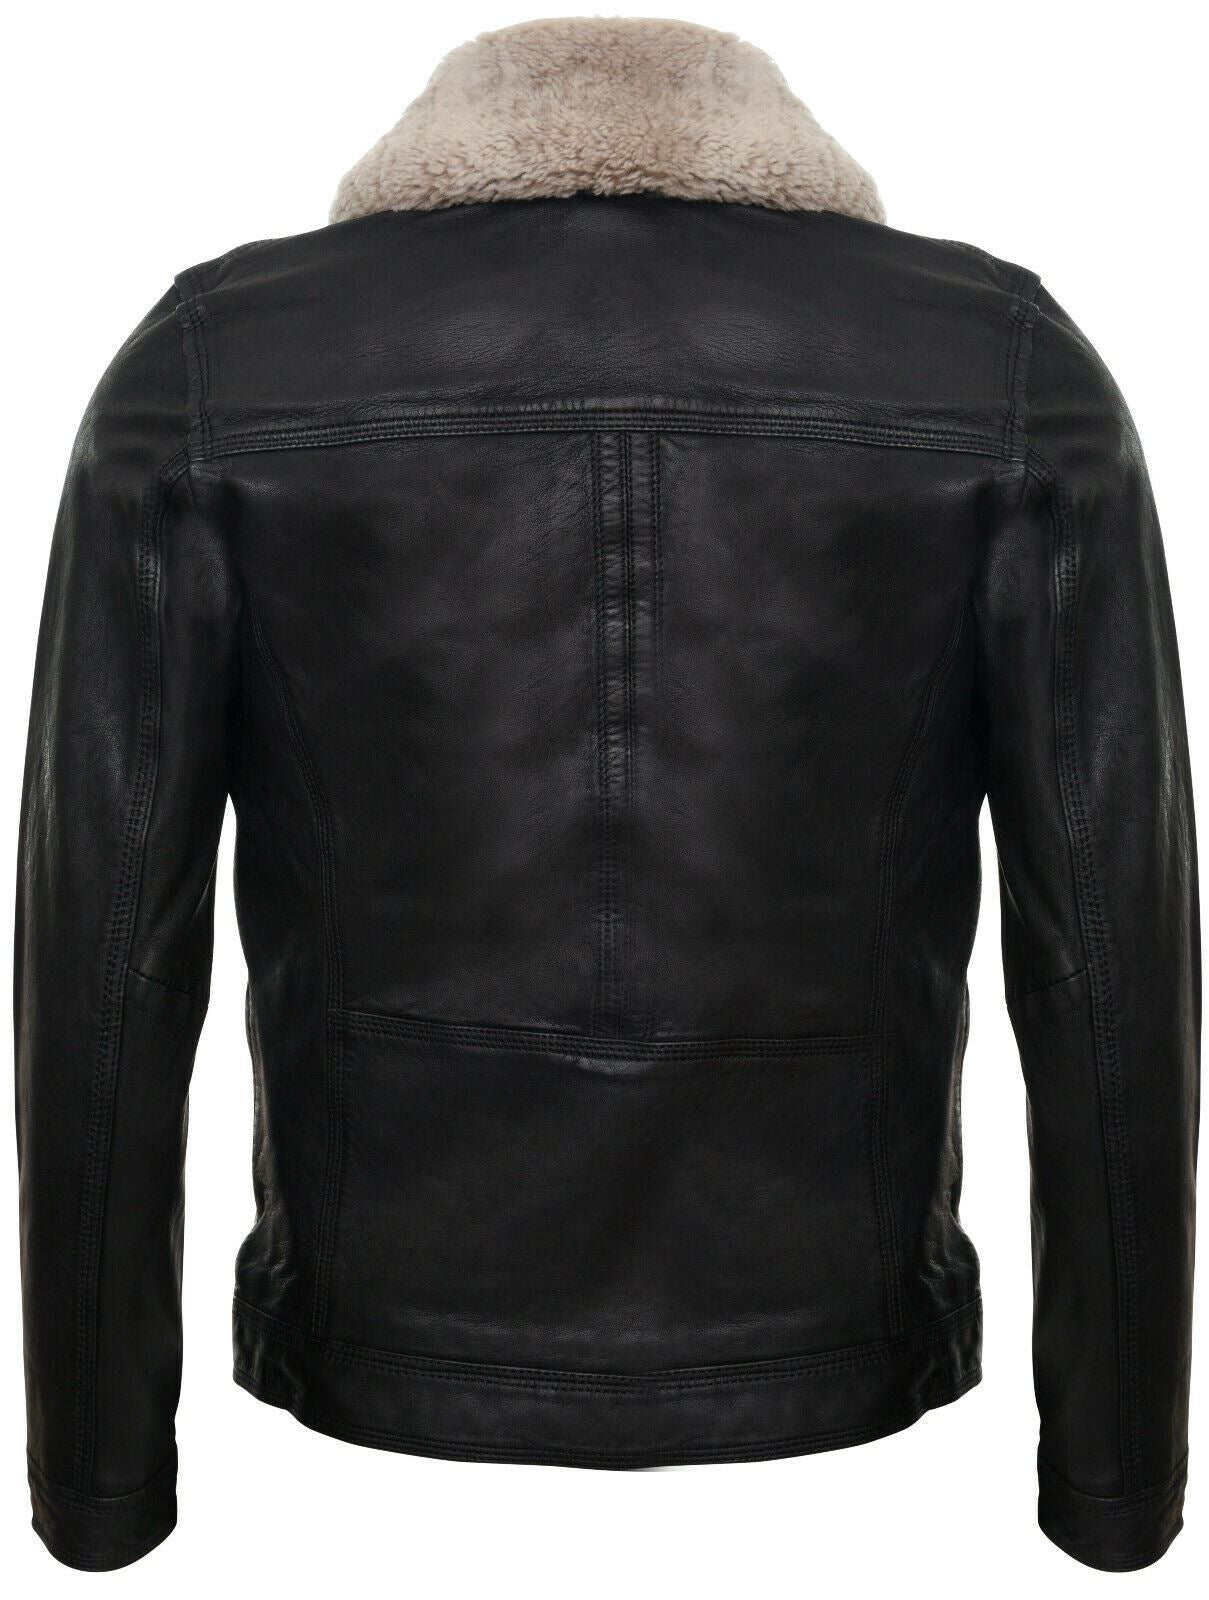 Mens Trucker Style Leather Jacket-Daventry - Upperclass Fashions 